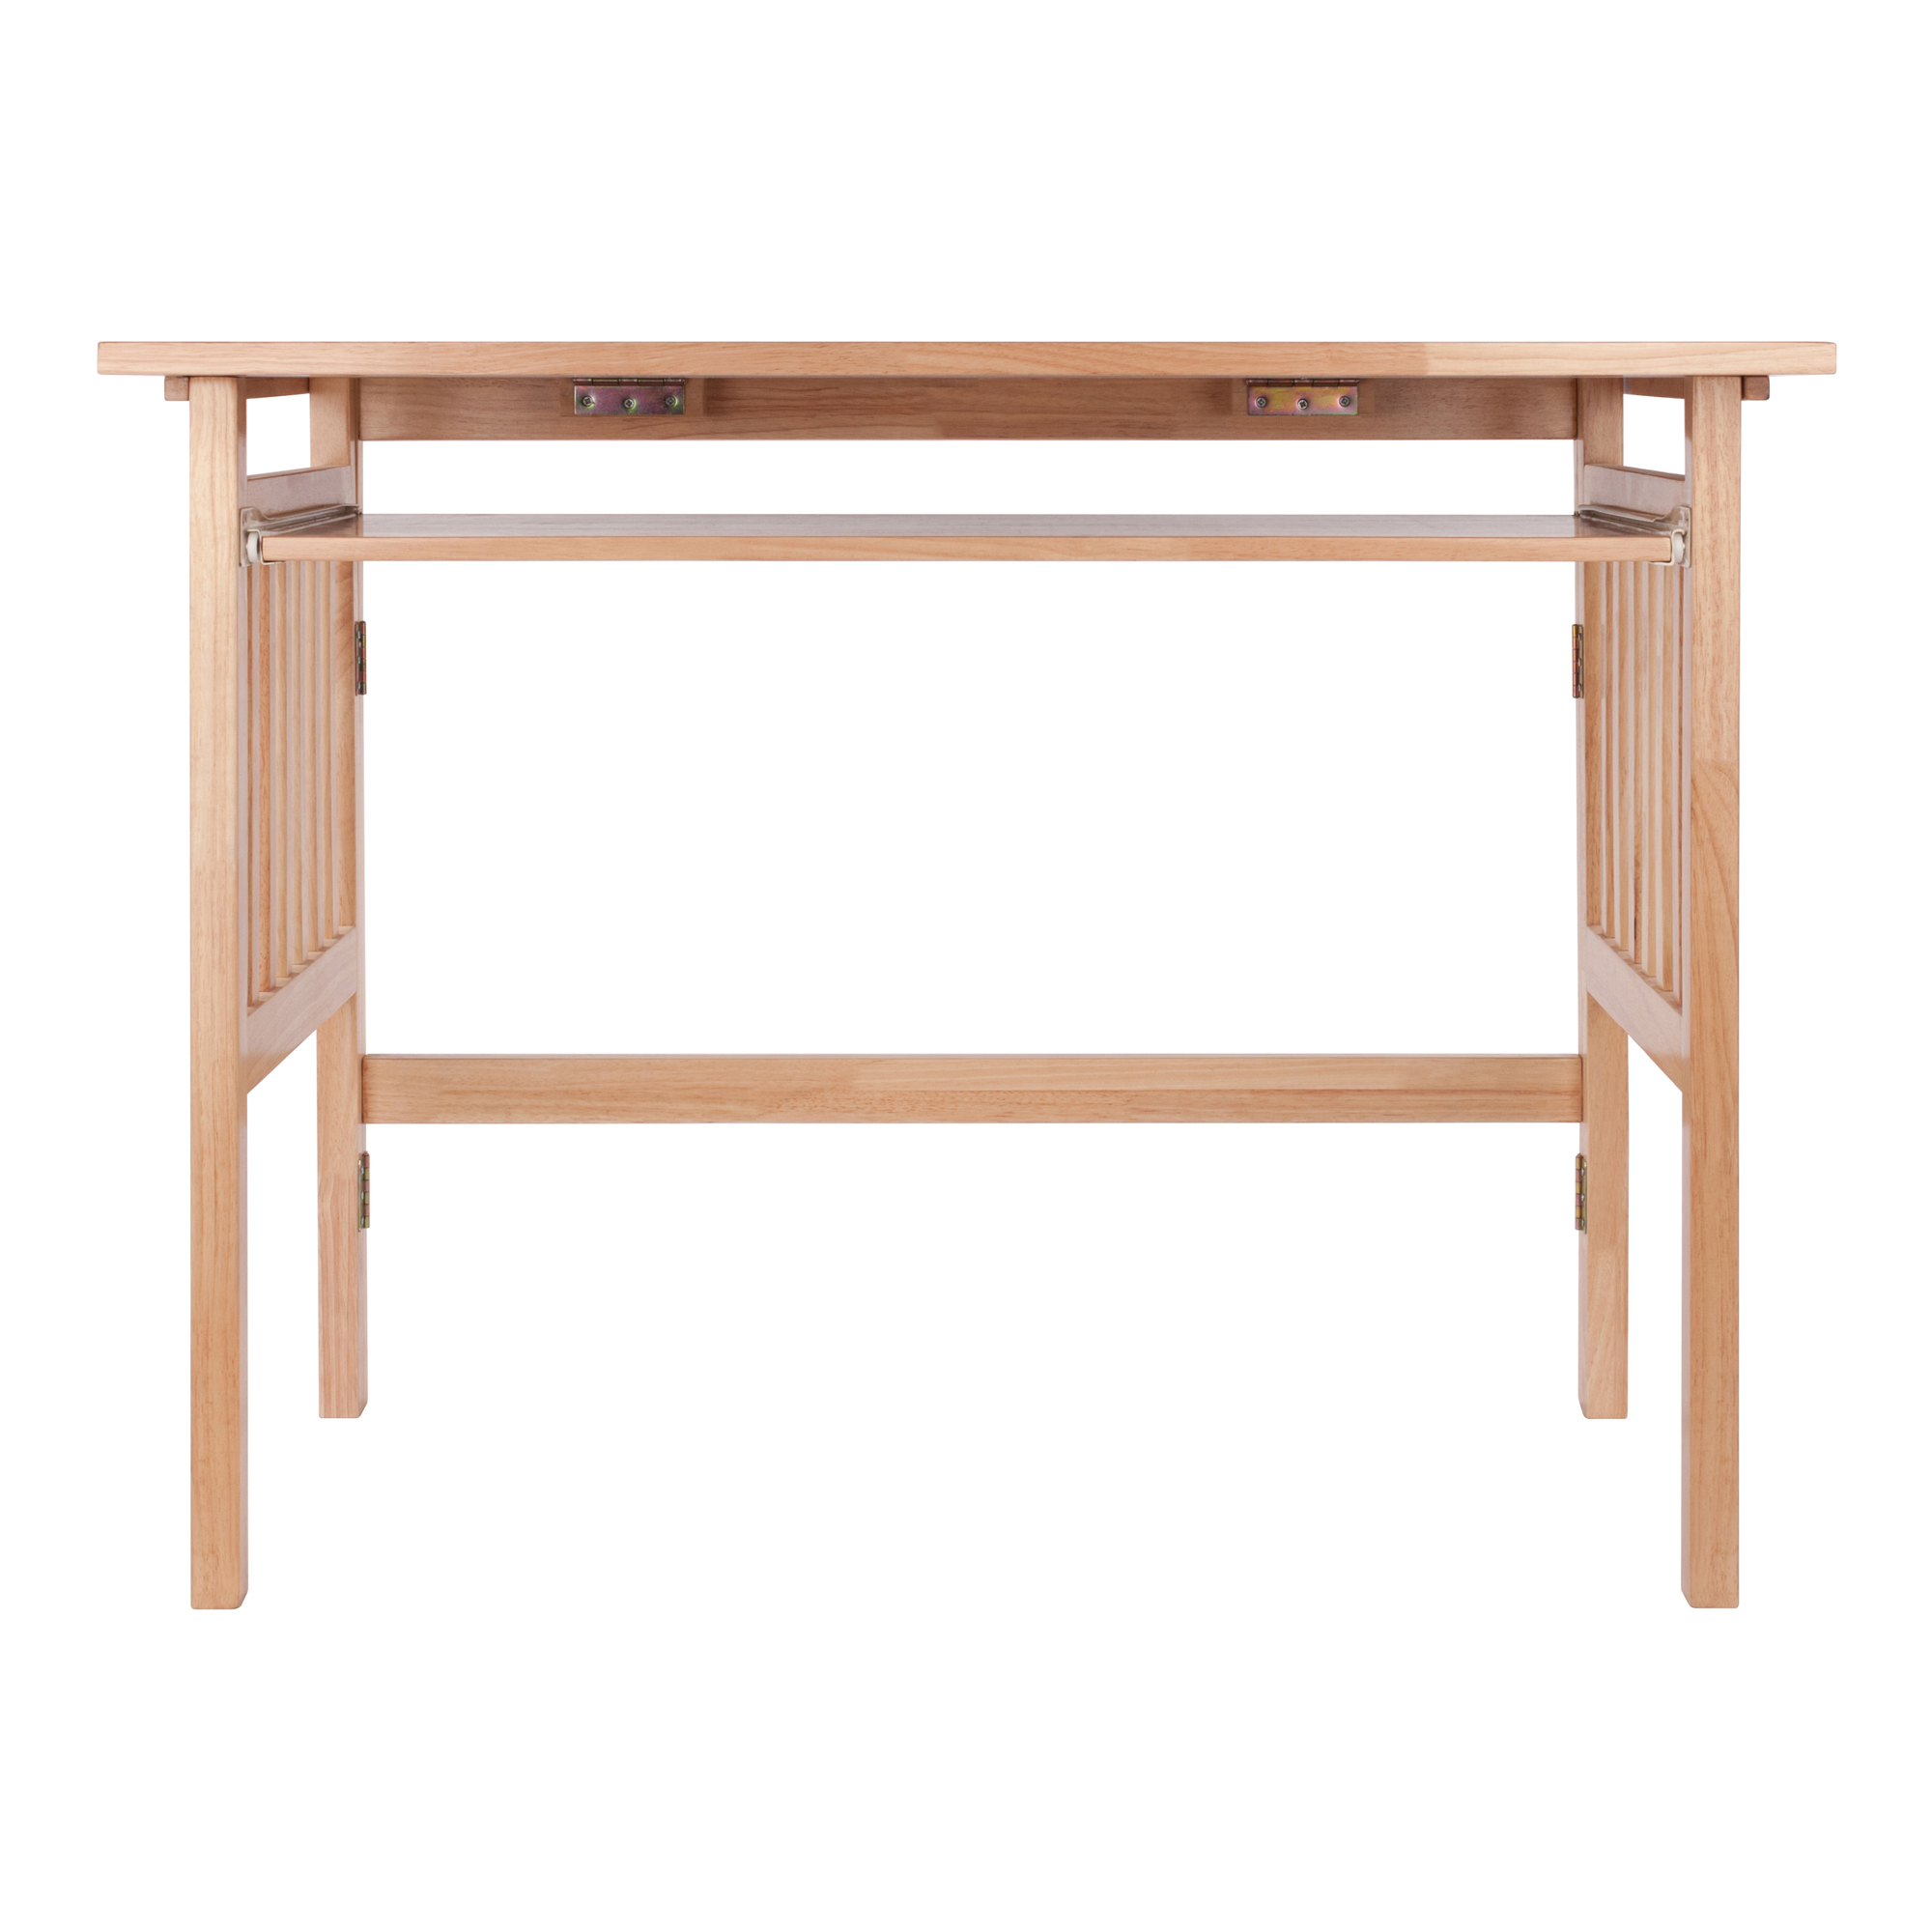 Winsome Wood Mission Foldable Computer Desk, Natural Finish - image 5 of 11